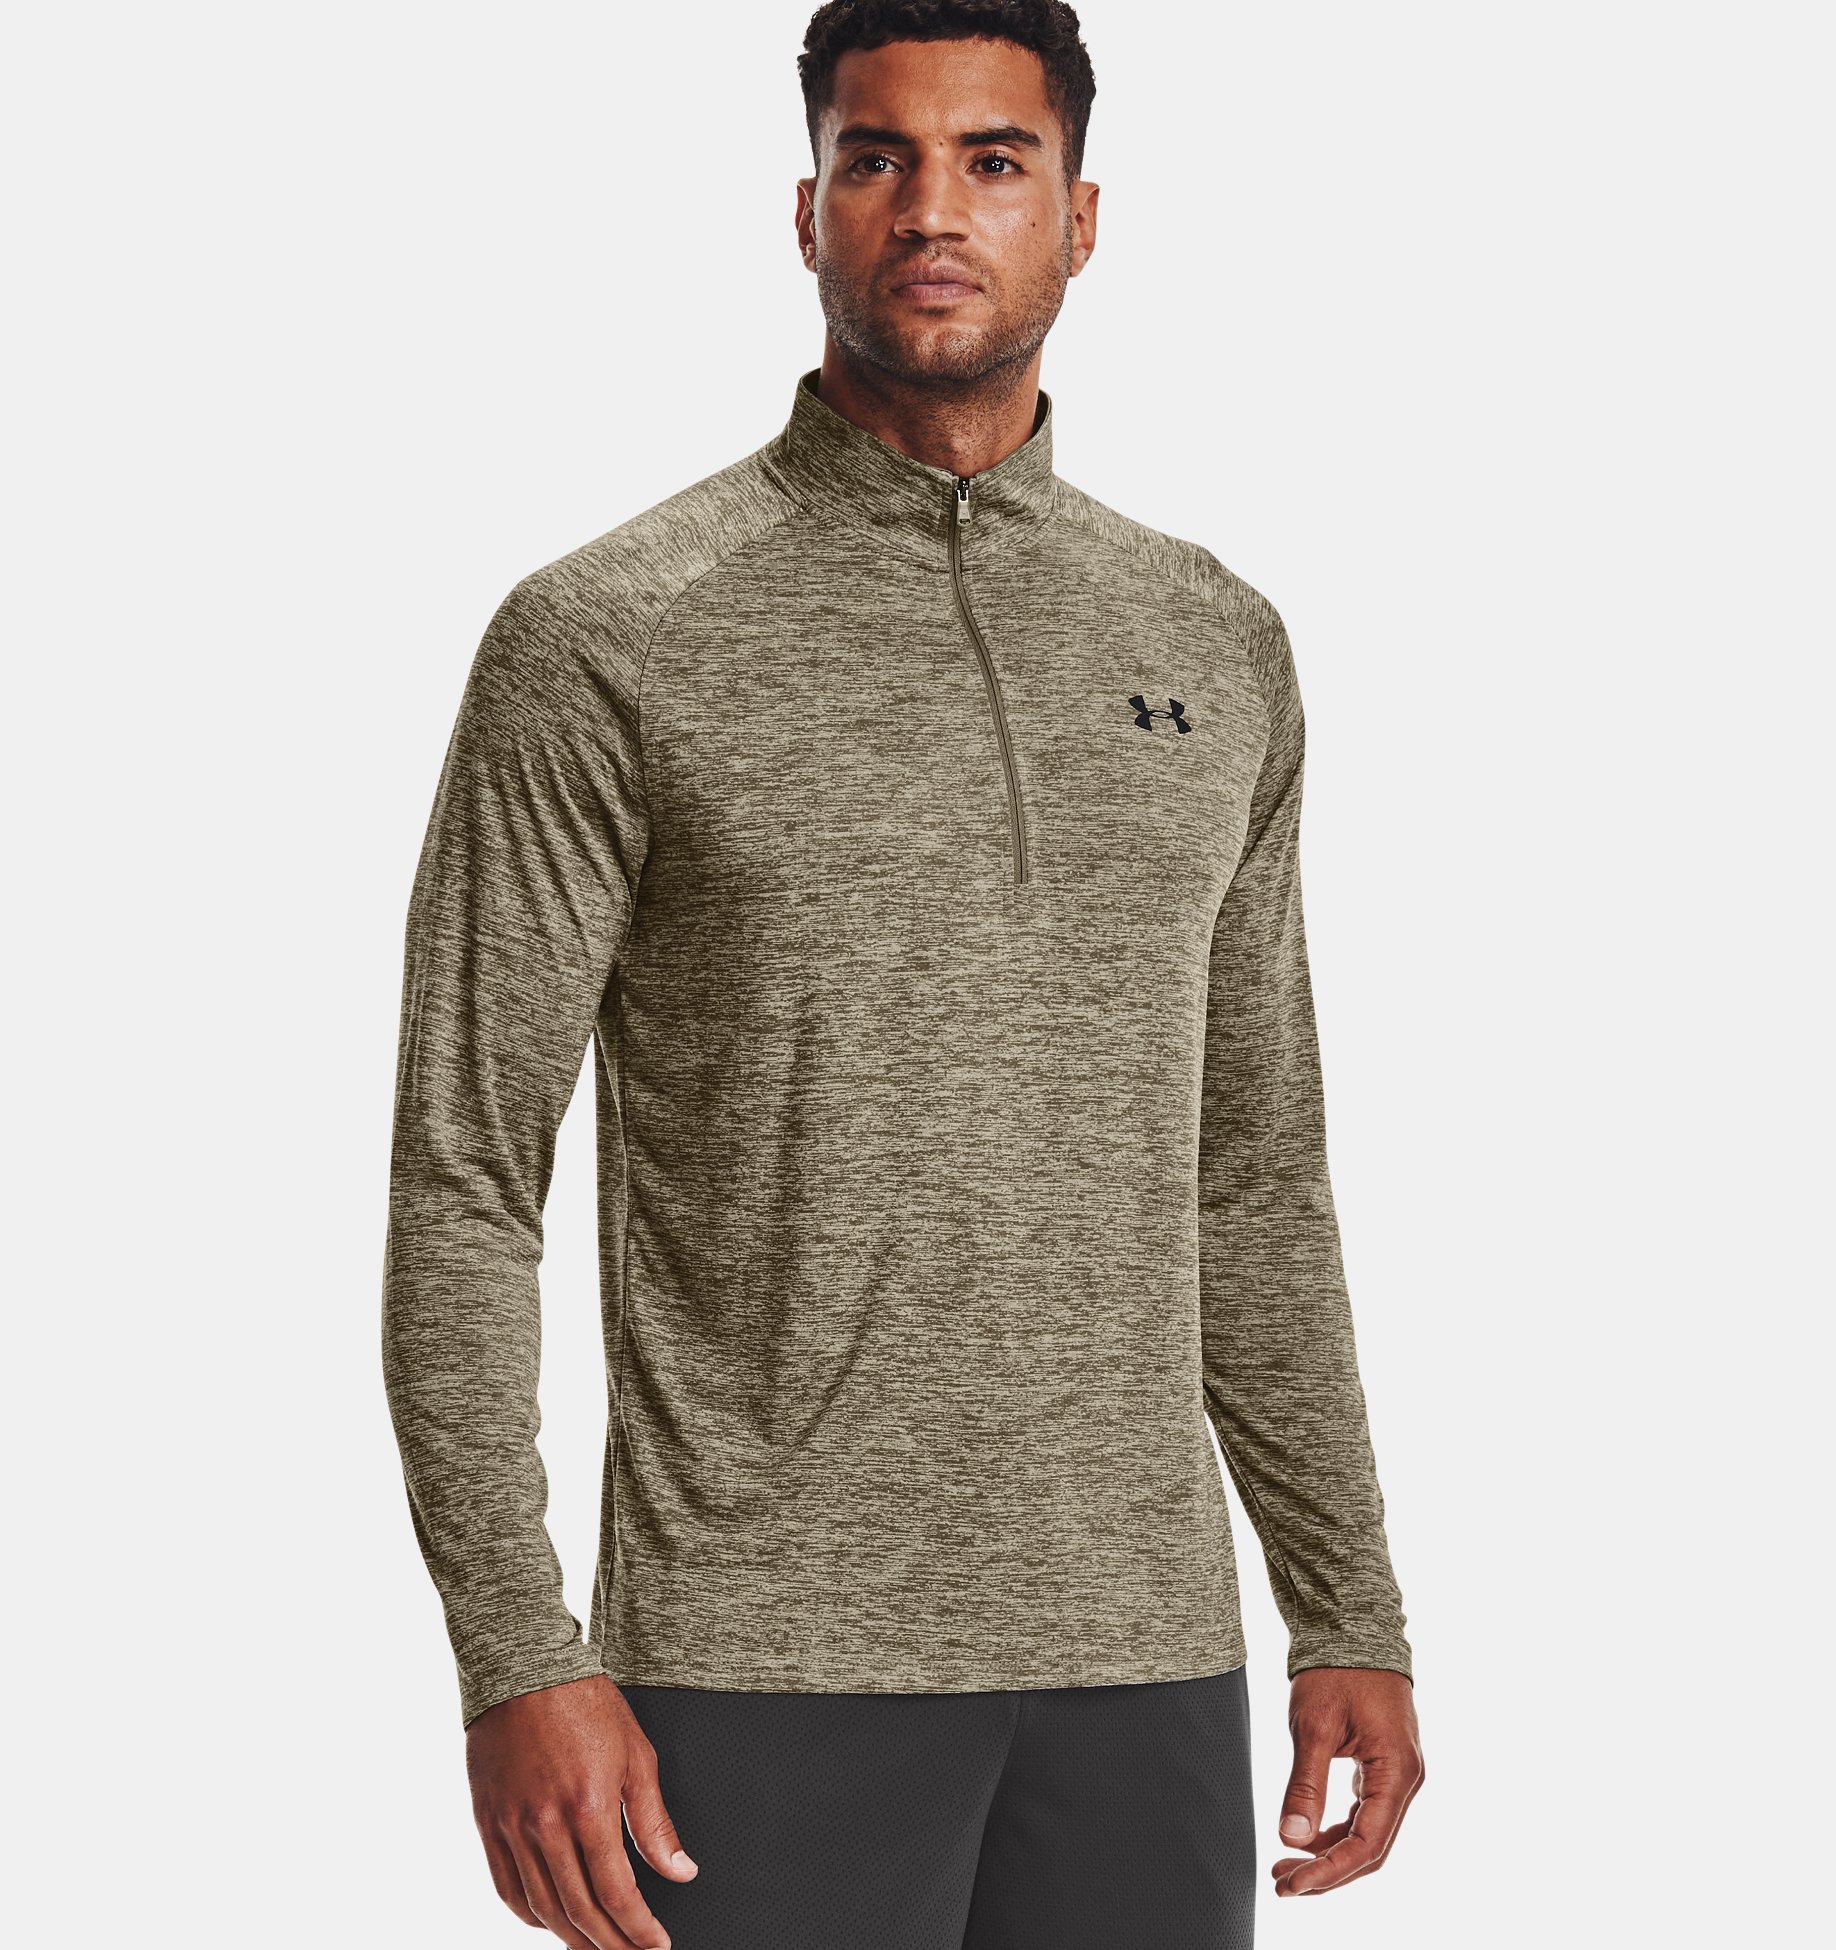 Under Armour Mens Technical 1/2 Zip Loose Fit Training Running Top 